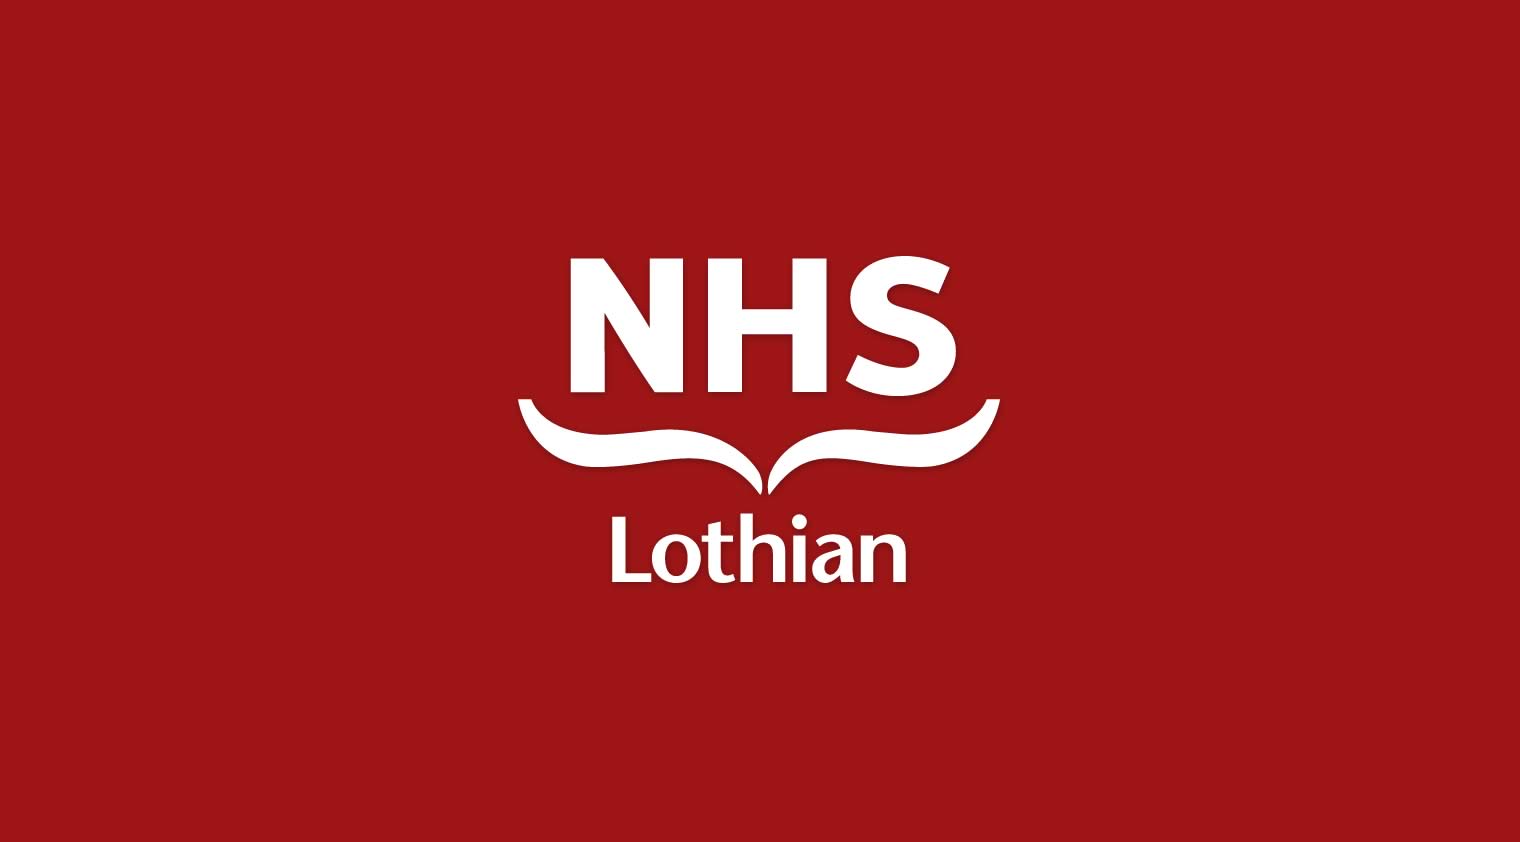 NHS Lothian logo on a red background